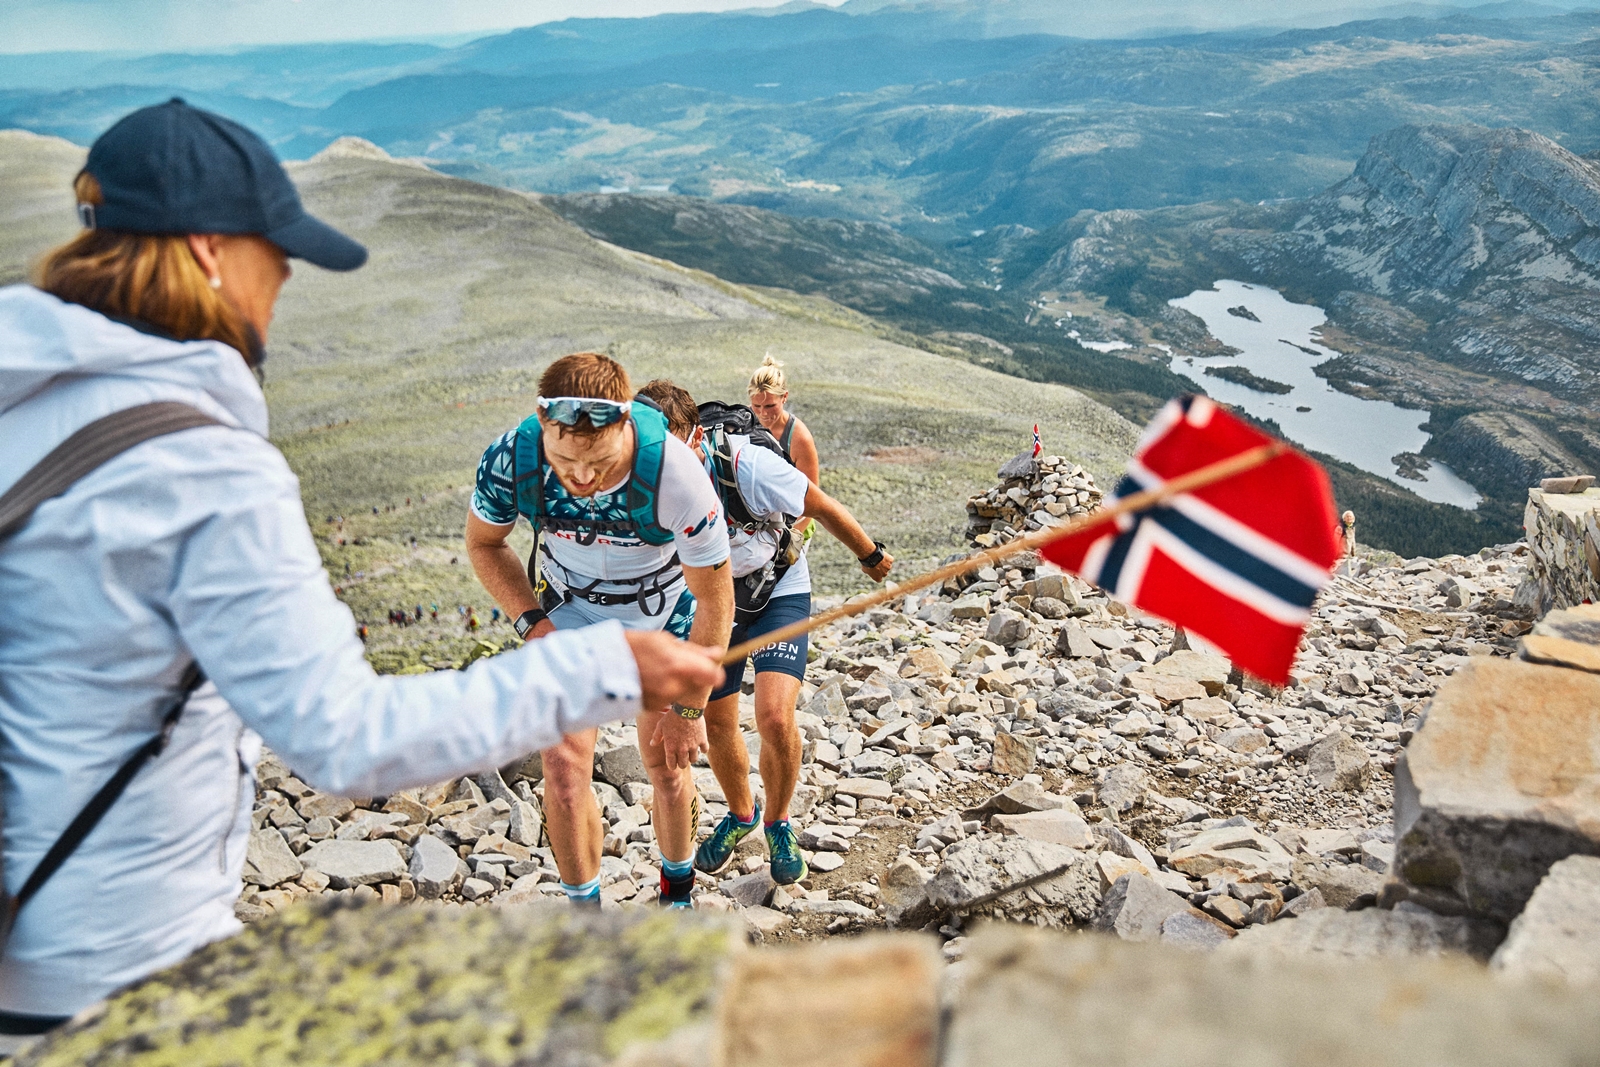 What Age Is The Oldest Person To Complete The Norseman Triathlon